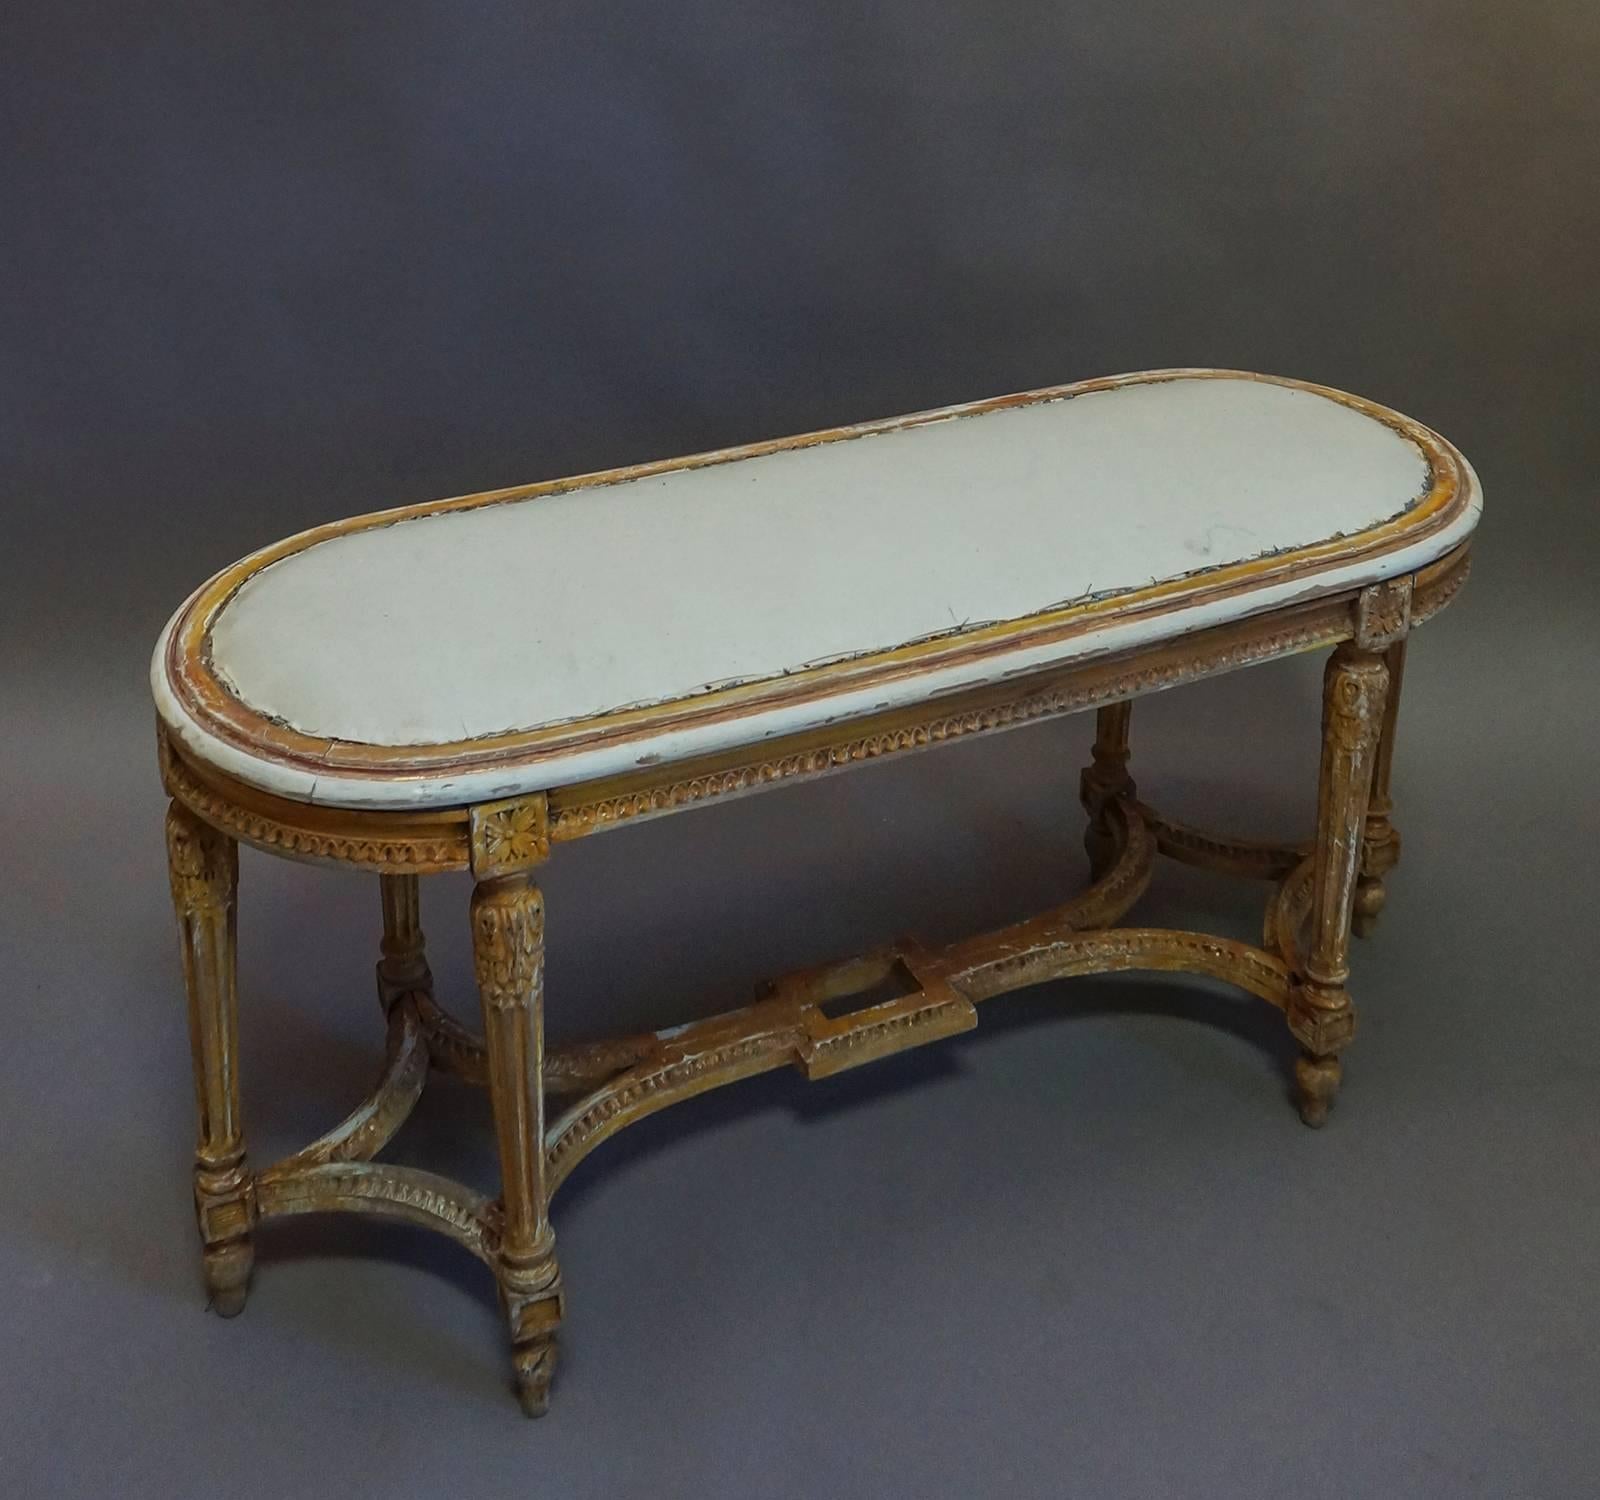 Six-legged bench in the Italian Directoire style, circa 1860, which retains traces of its original gilding. Egg and dart molding around the apron and on the stretchers and foliate carving at the top of each tapering round leg.